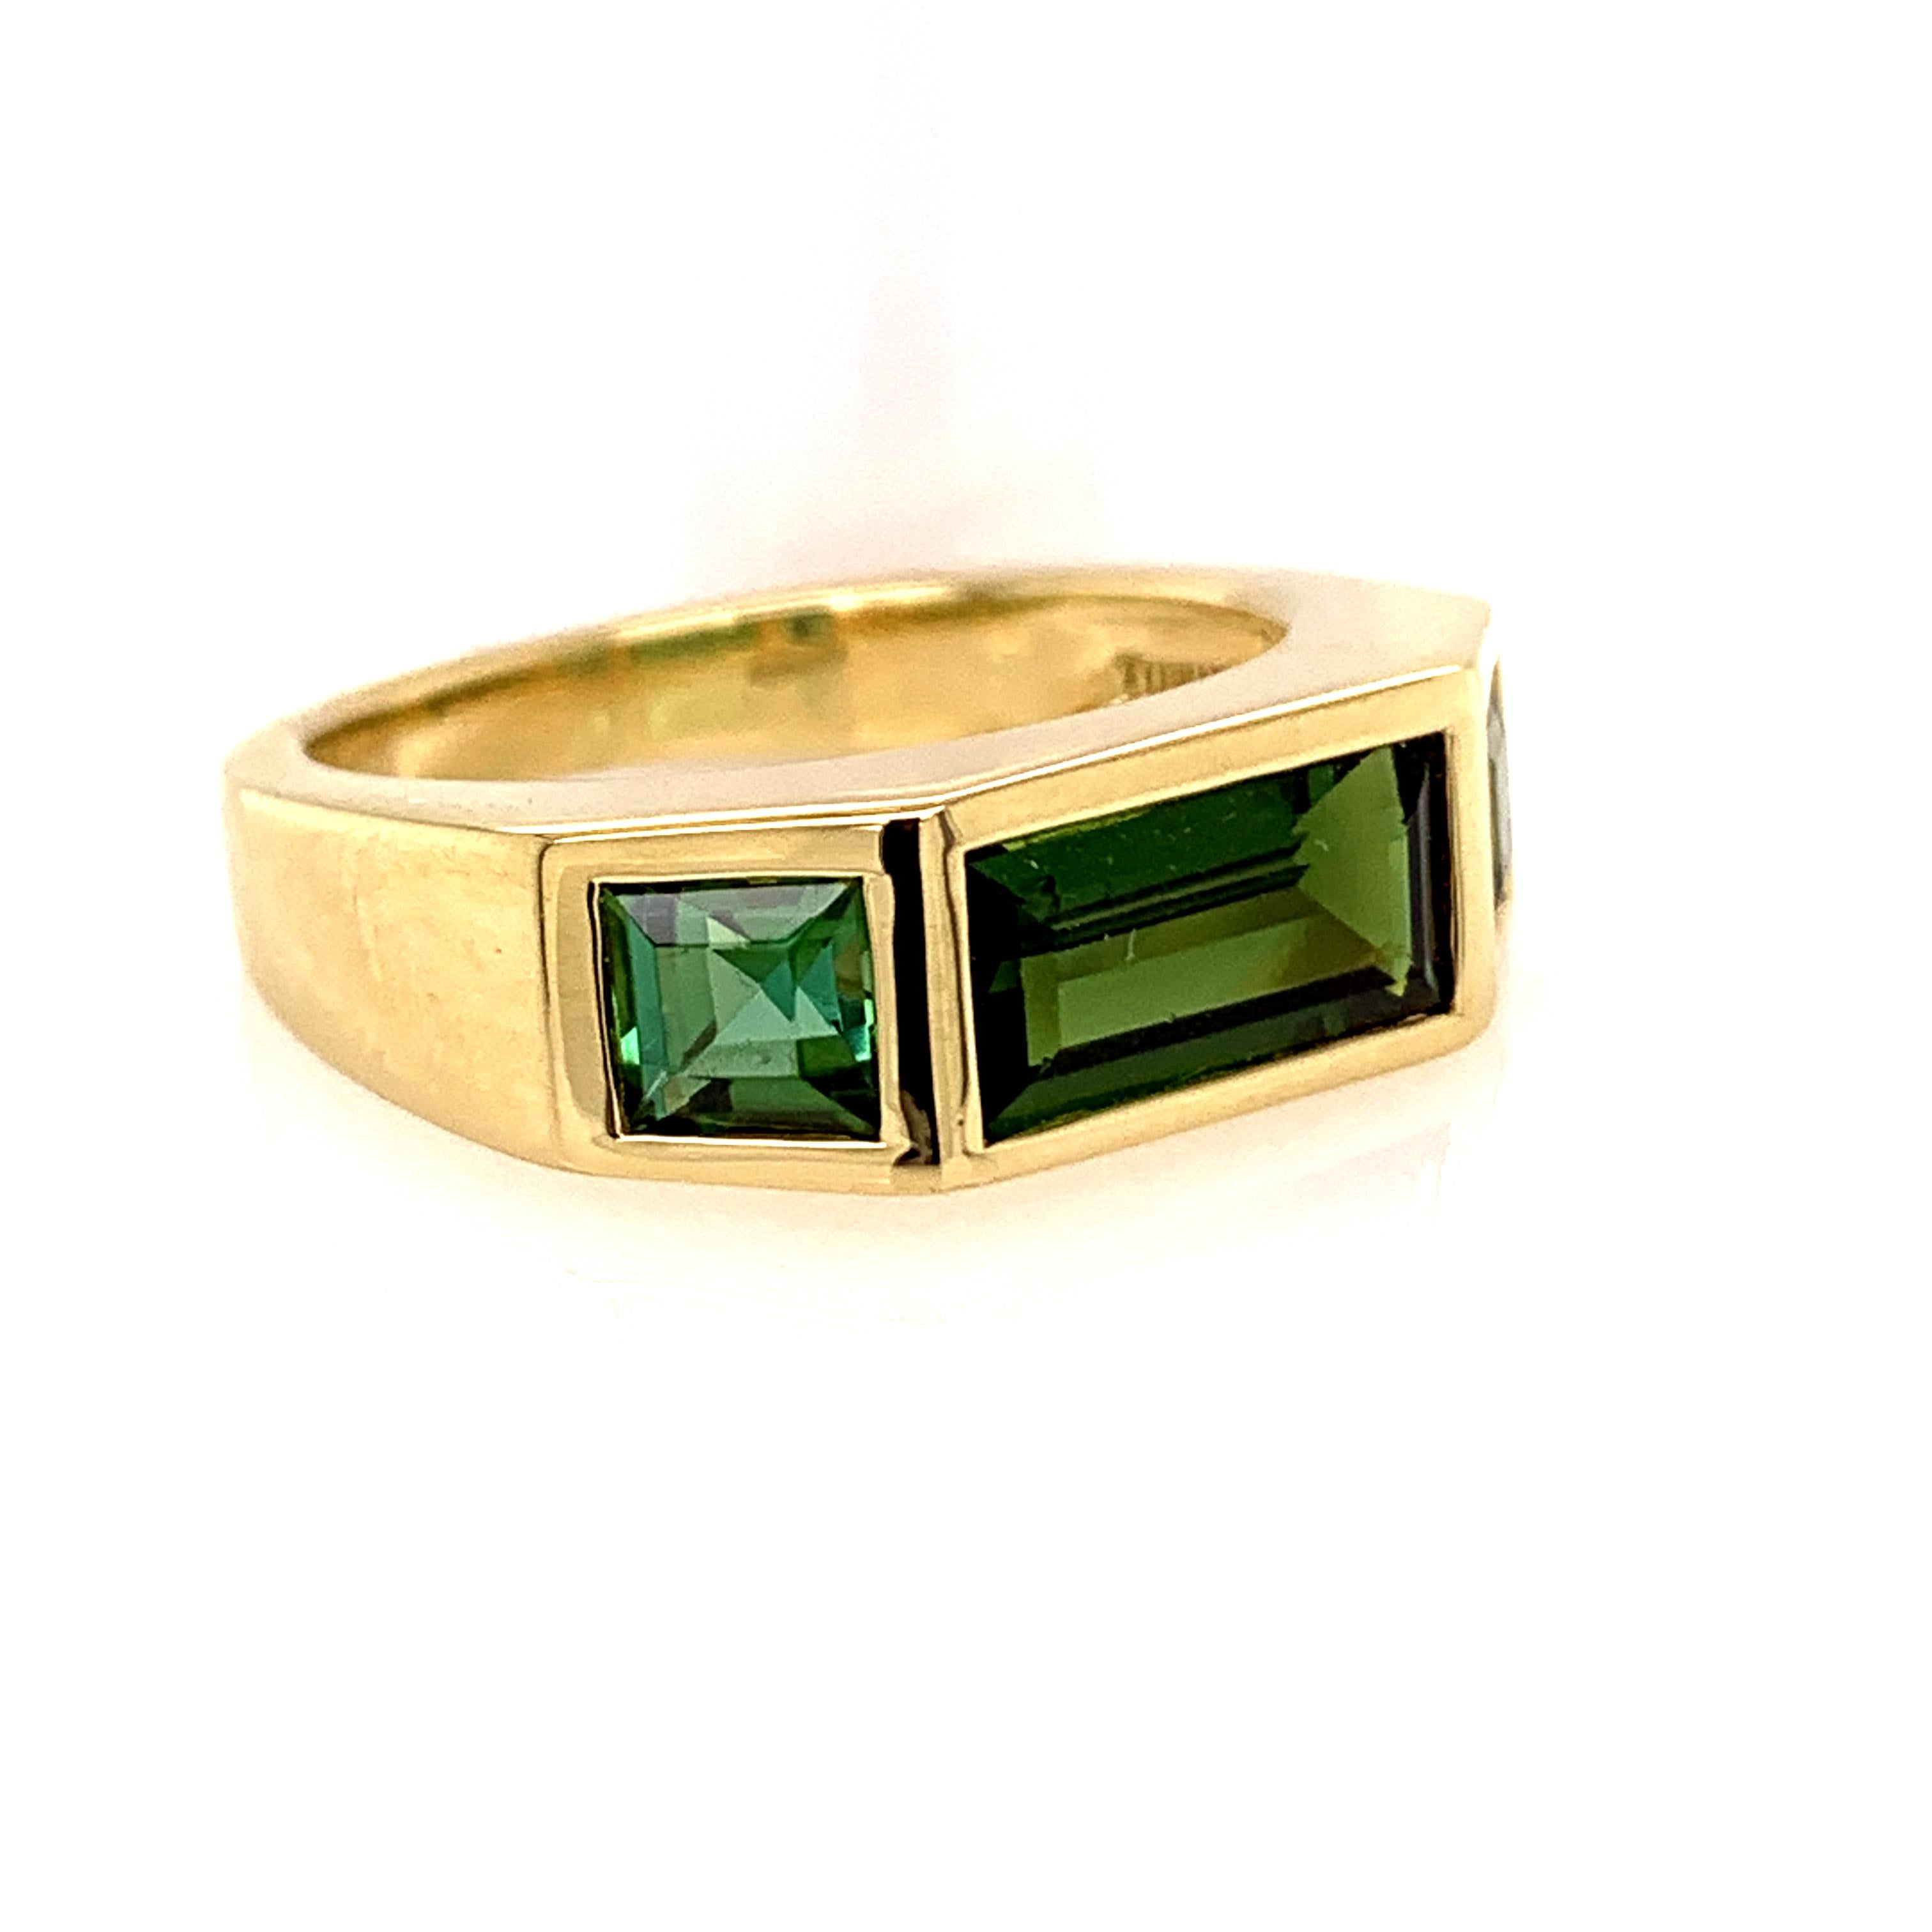 Beveled tourmaline ring.  Made and signed by Paloma Picasso for TIFFANY & CO.  18K yellow gold.  Three-stone tourmaline with emerald-cut tourmalines. Size 7 1/2 and can be custom-sized.  Contoured to hug the finger.  Part of the Studio Collection. 